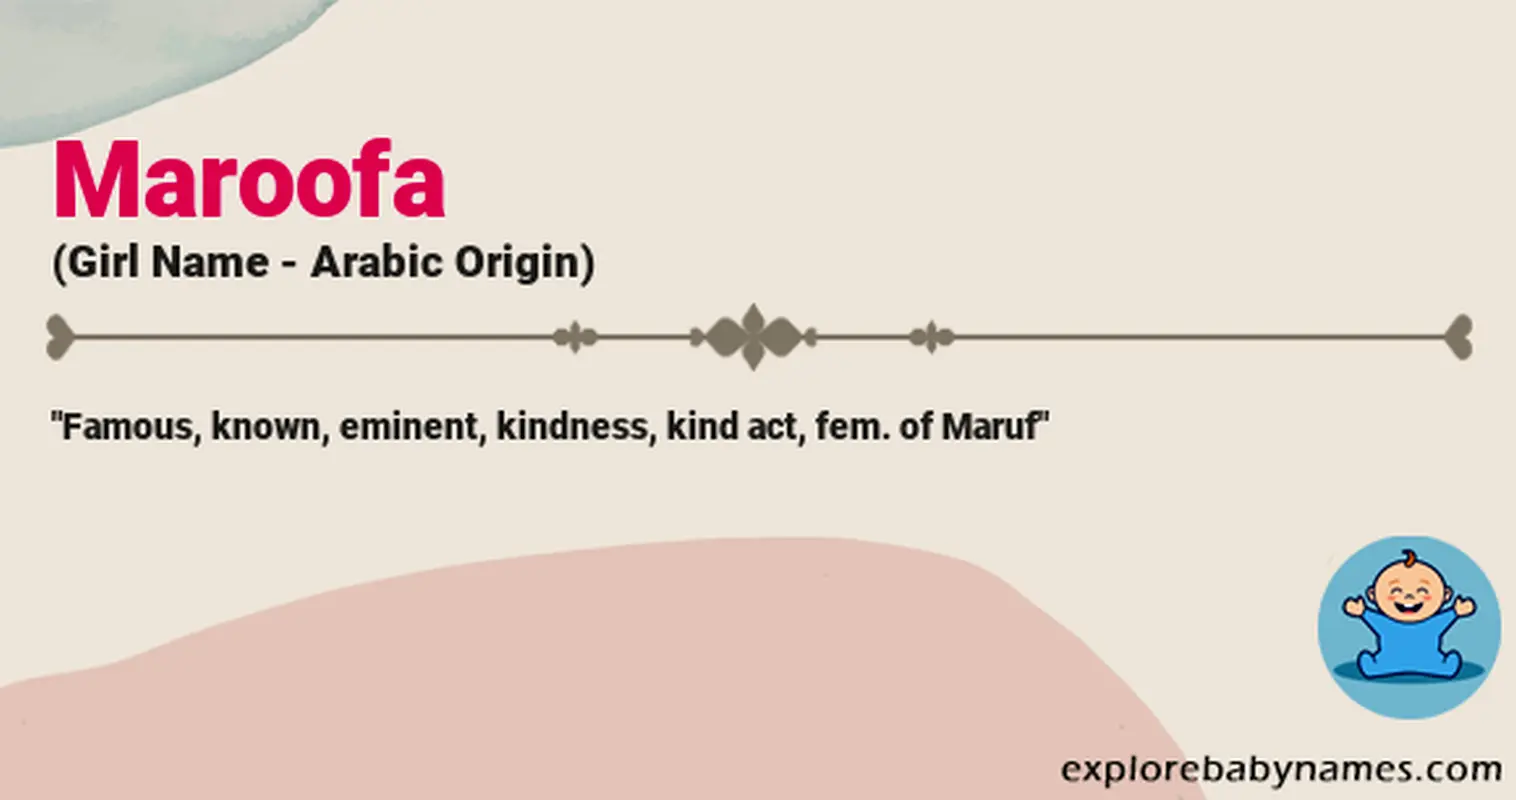 Meaning of Maroofa